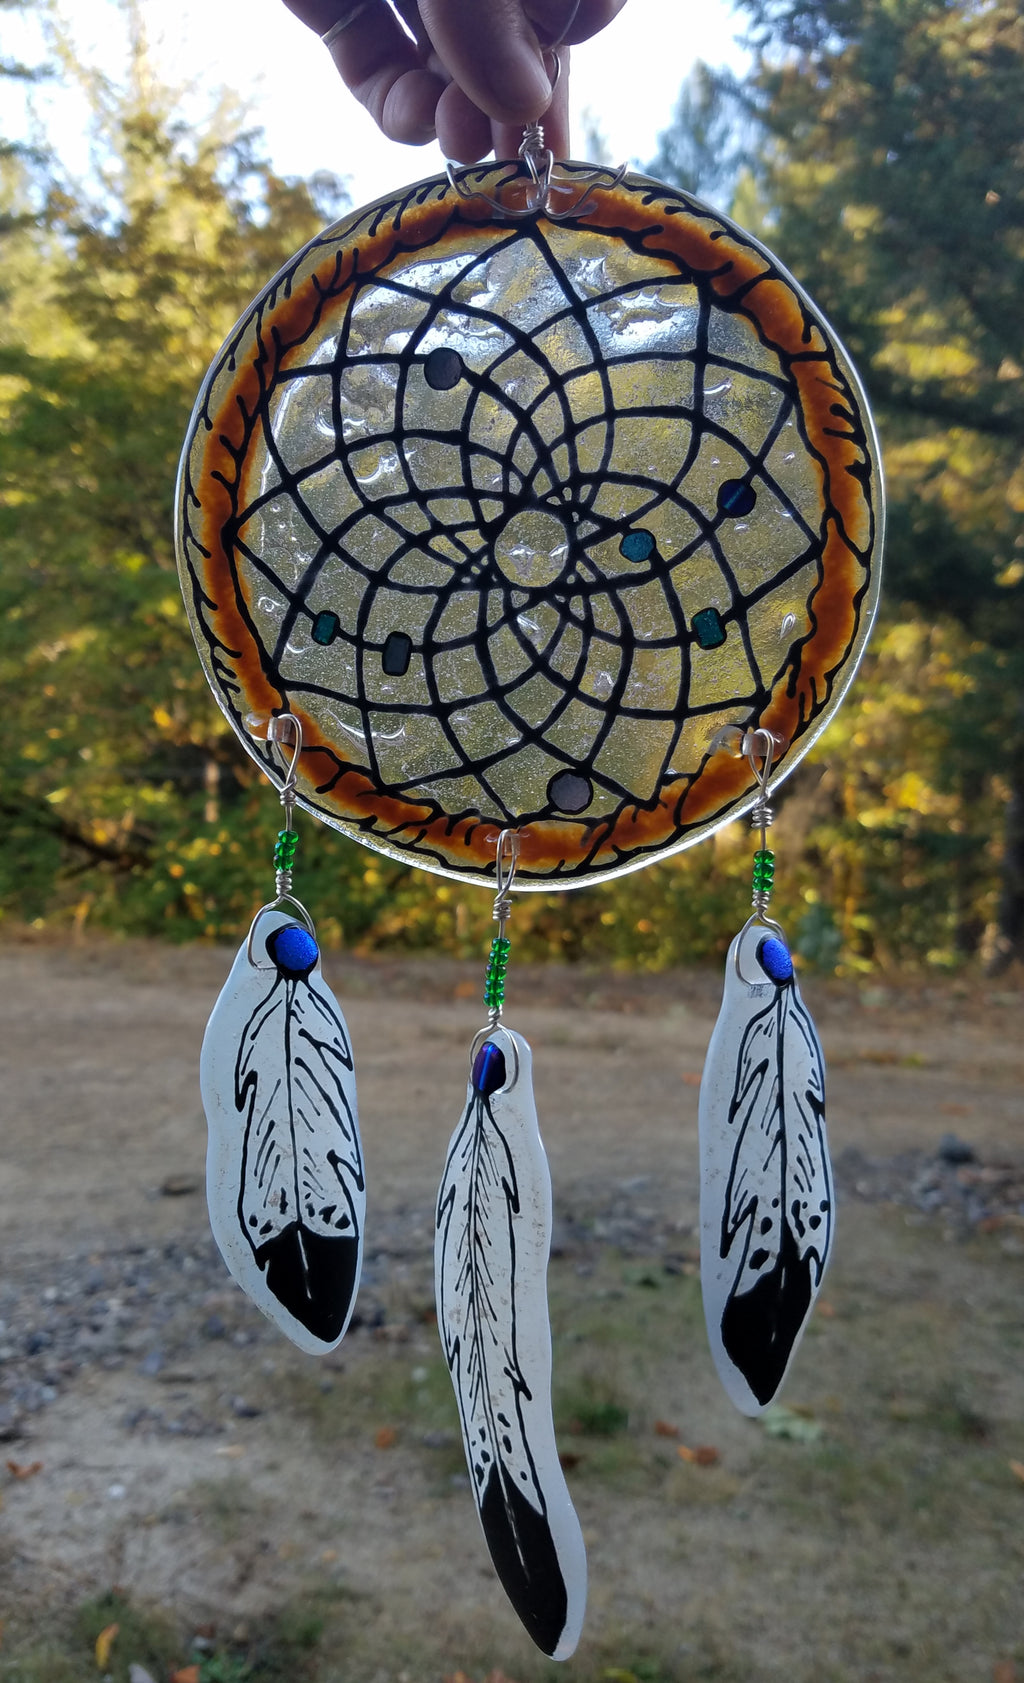 Ashes in glass Dream Catcher Handmade Glass Feathers Ashes Infused Glass by Infusion Glass Cremation Memorial Sun catcher